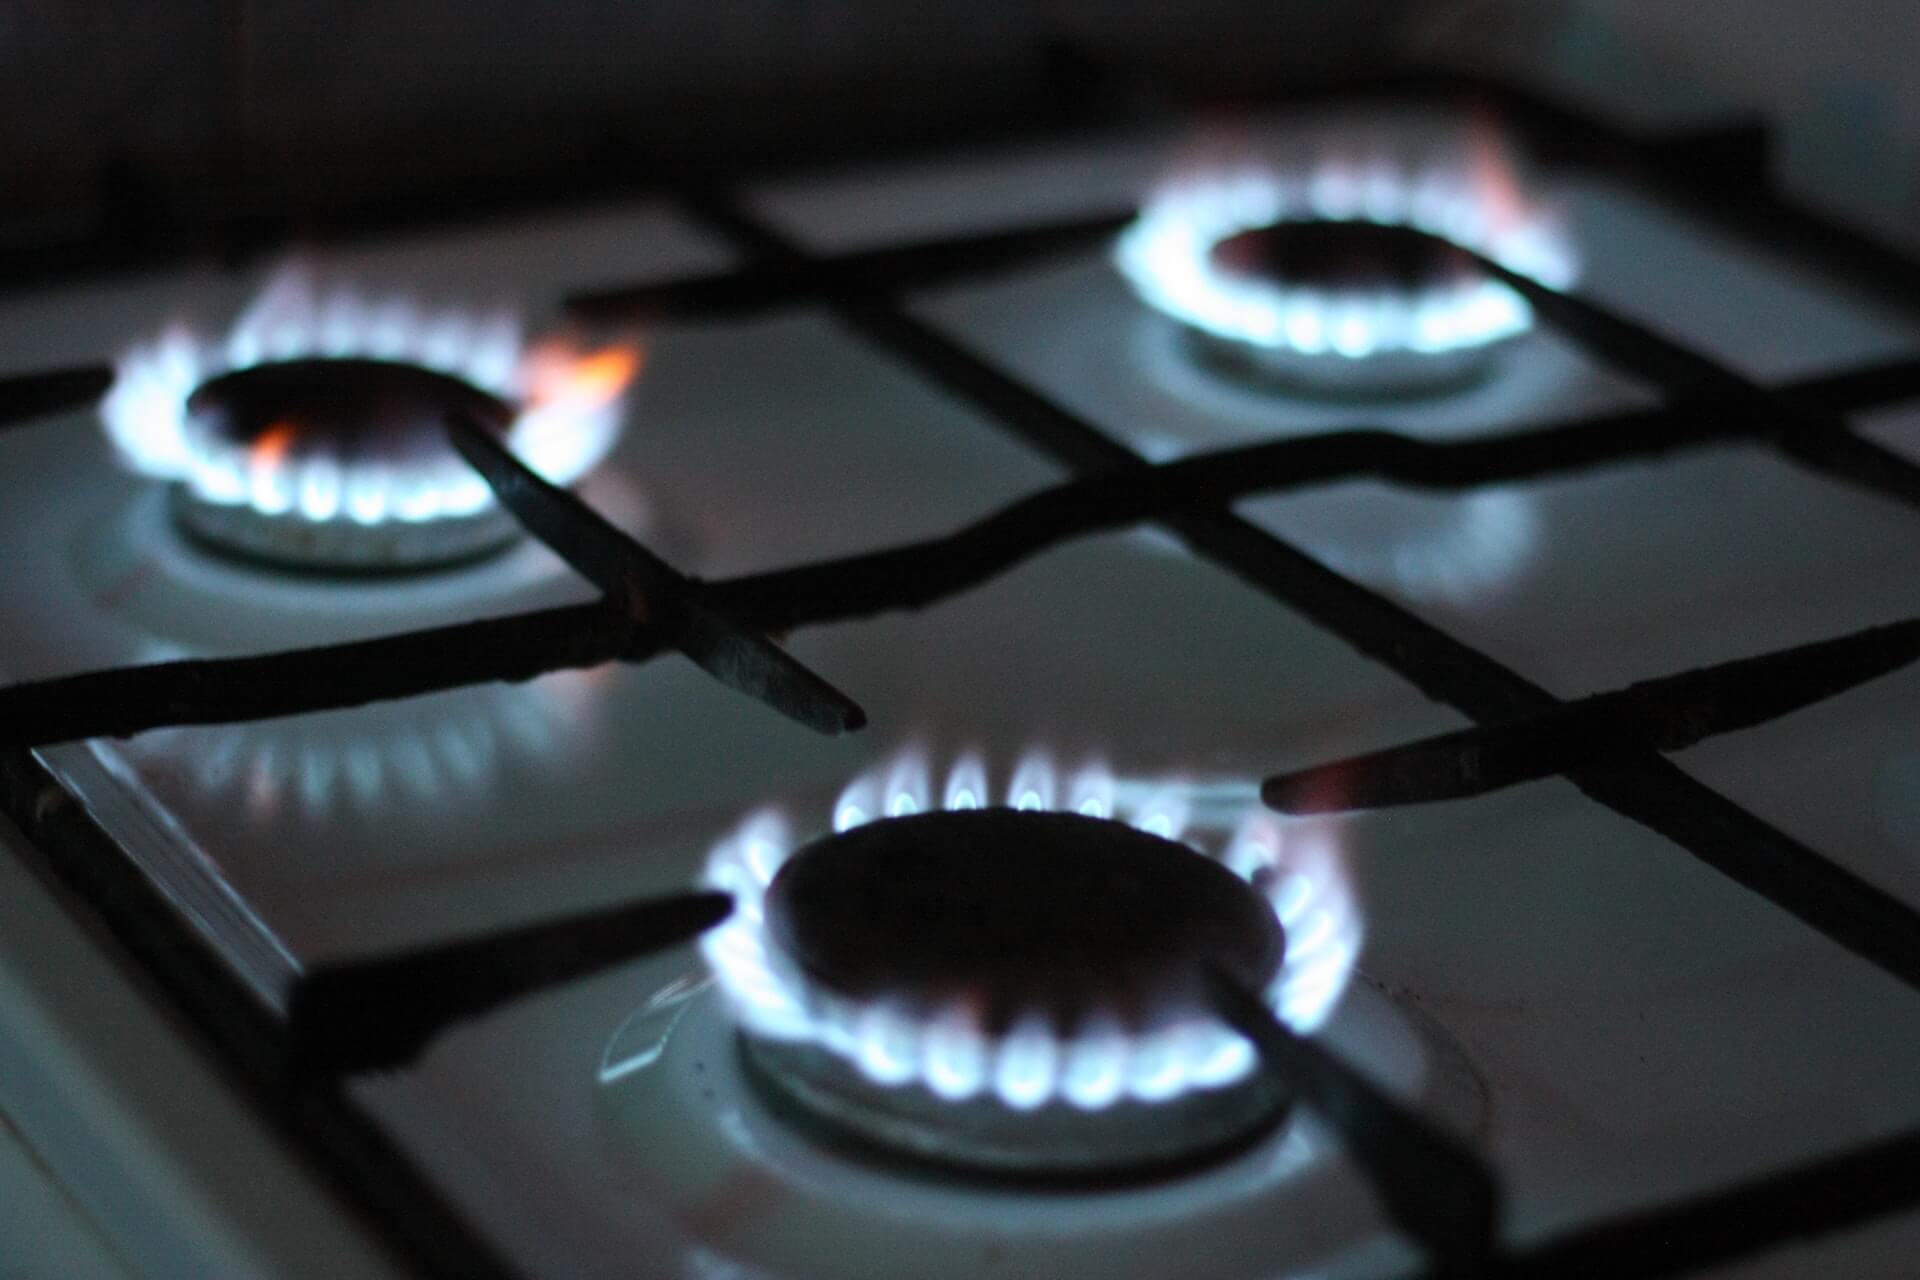 Gas flames from a gas cooktop